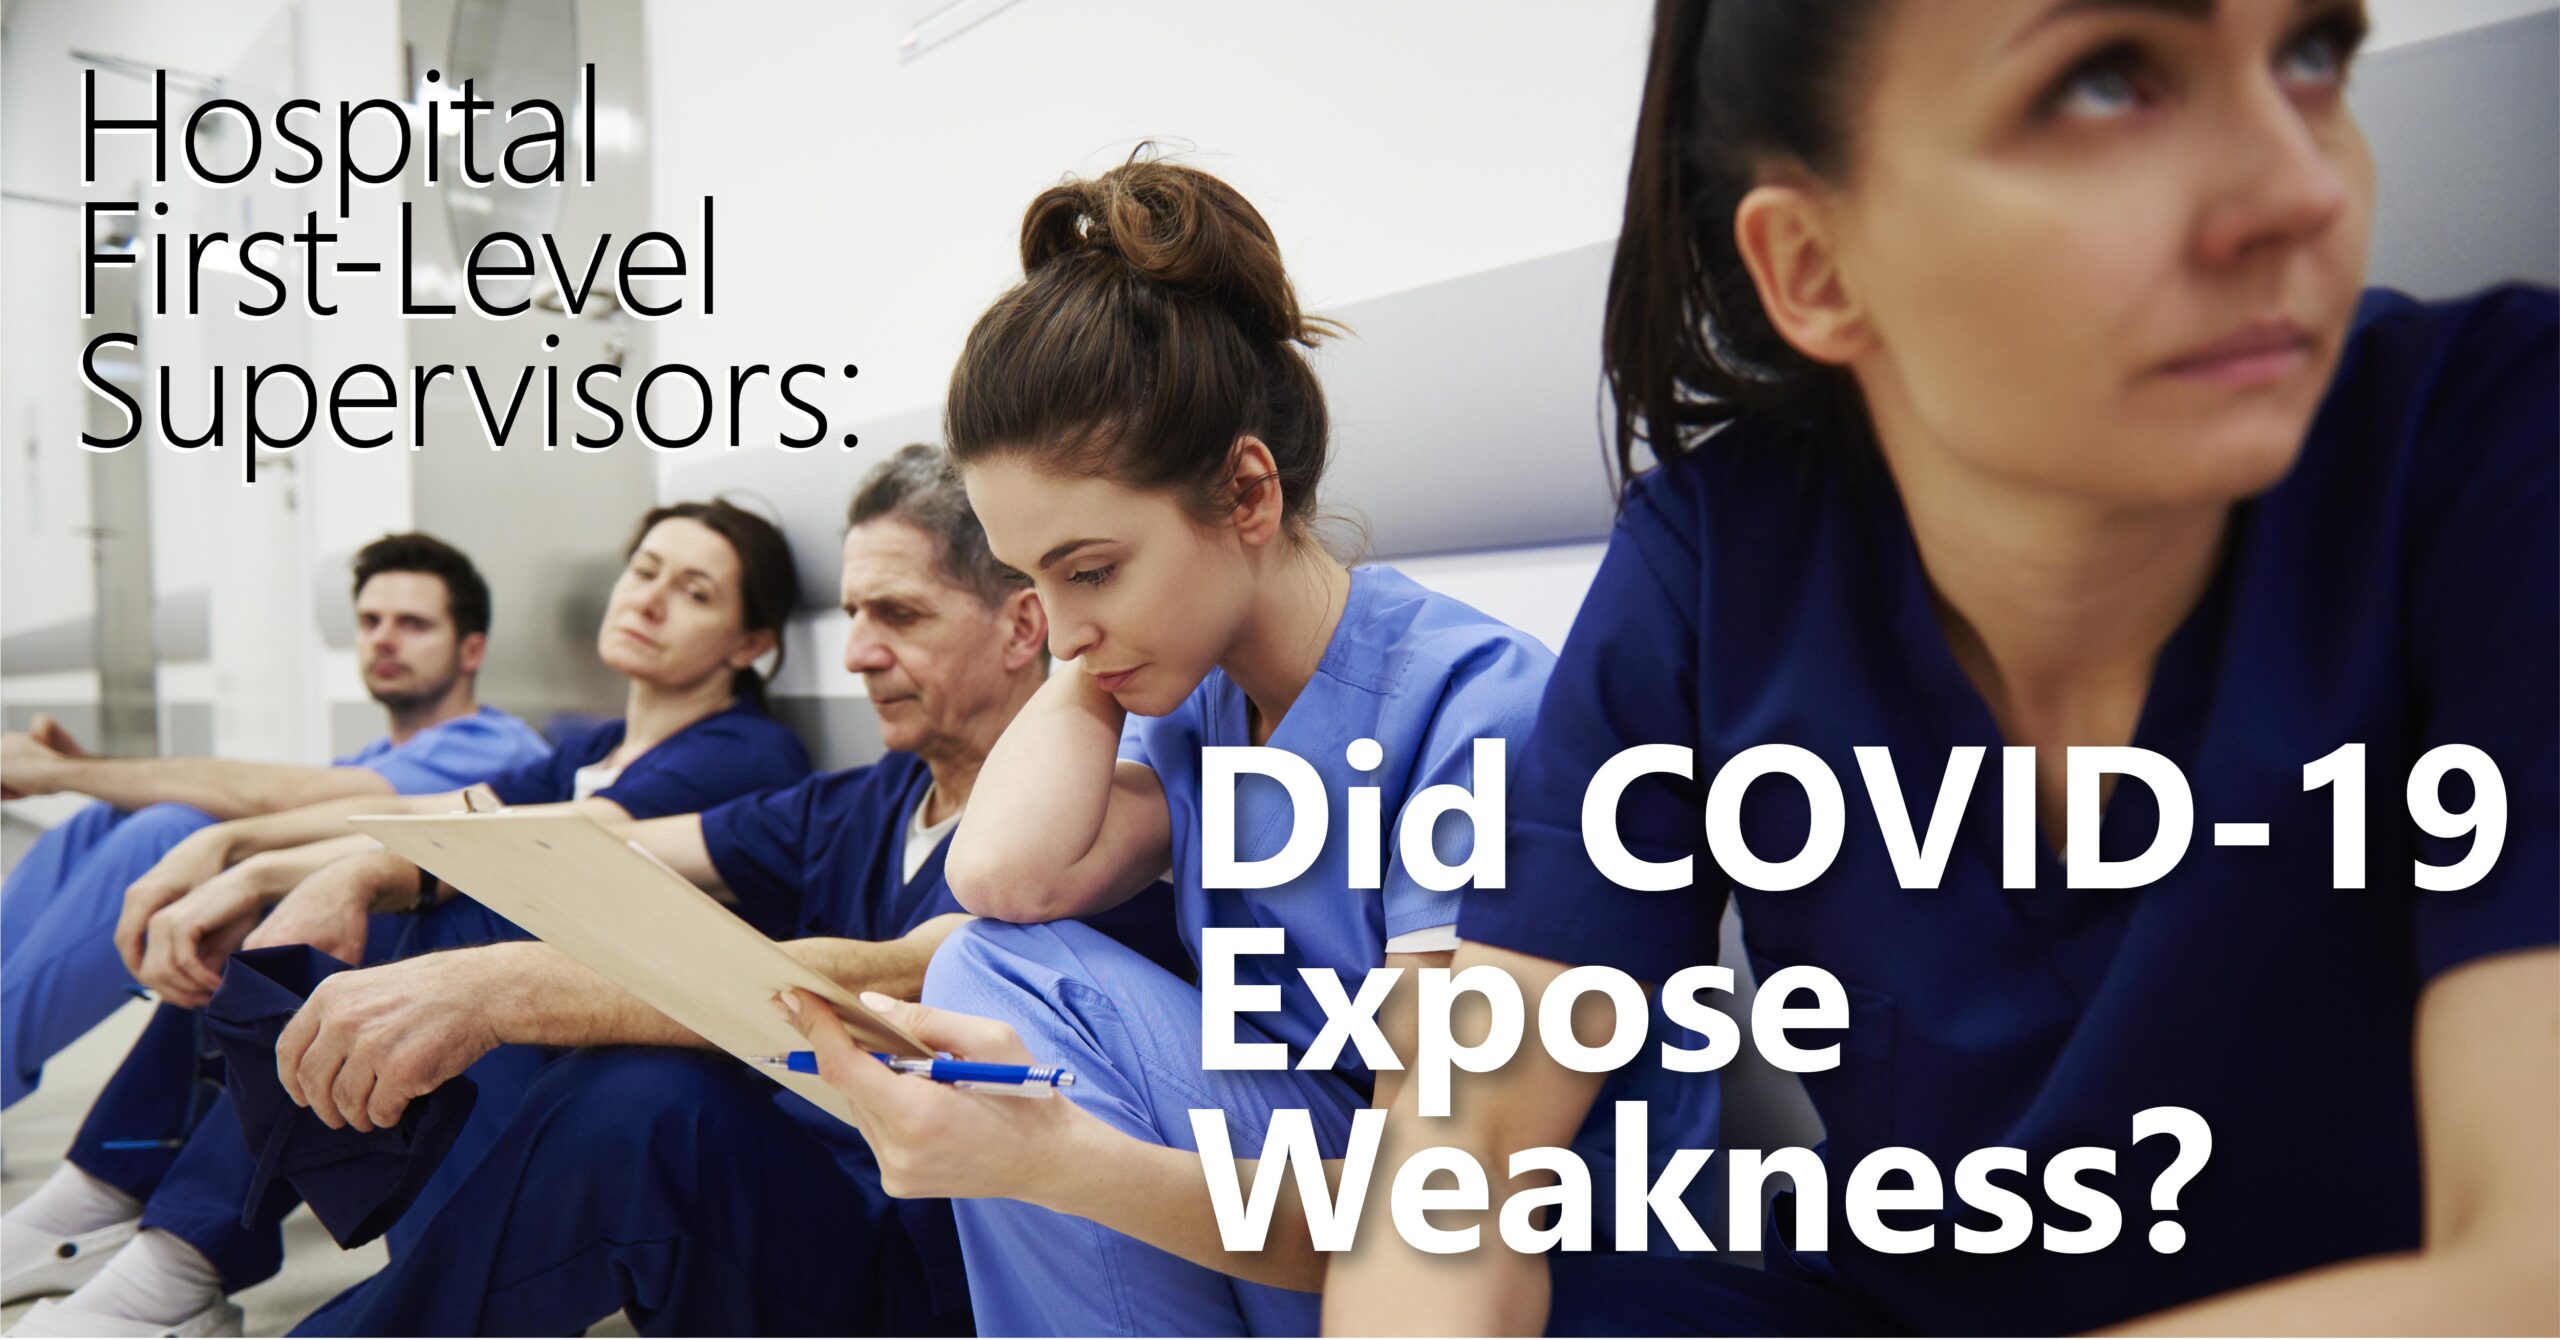 Hospital First-Level Supervisors: Did COVID-19 Expose Weakness?